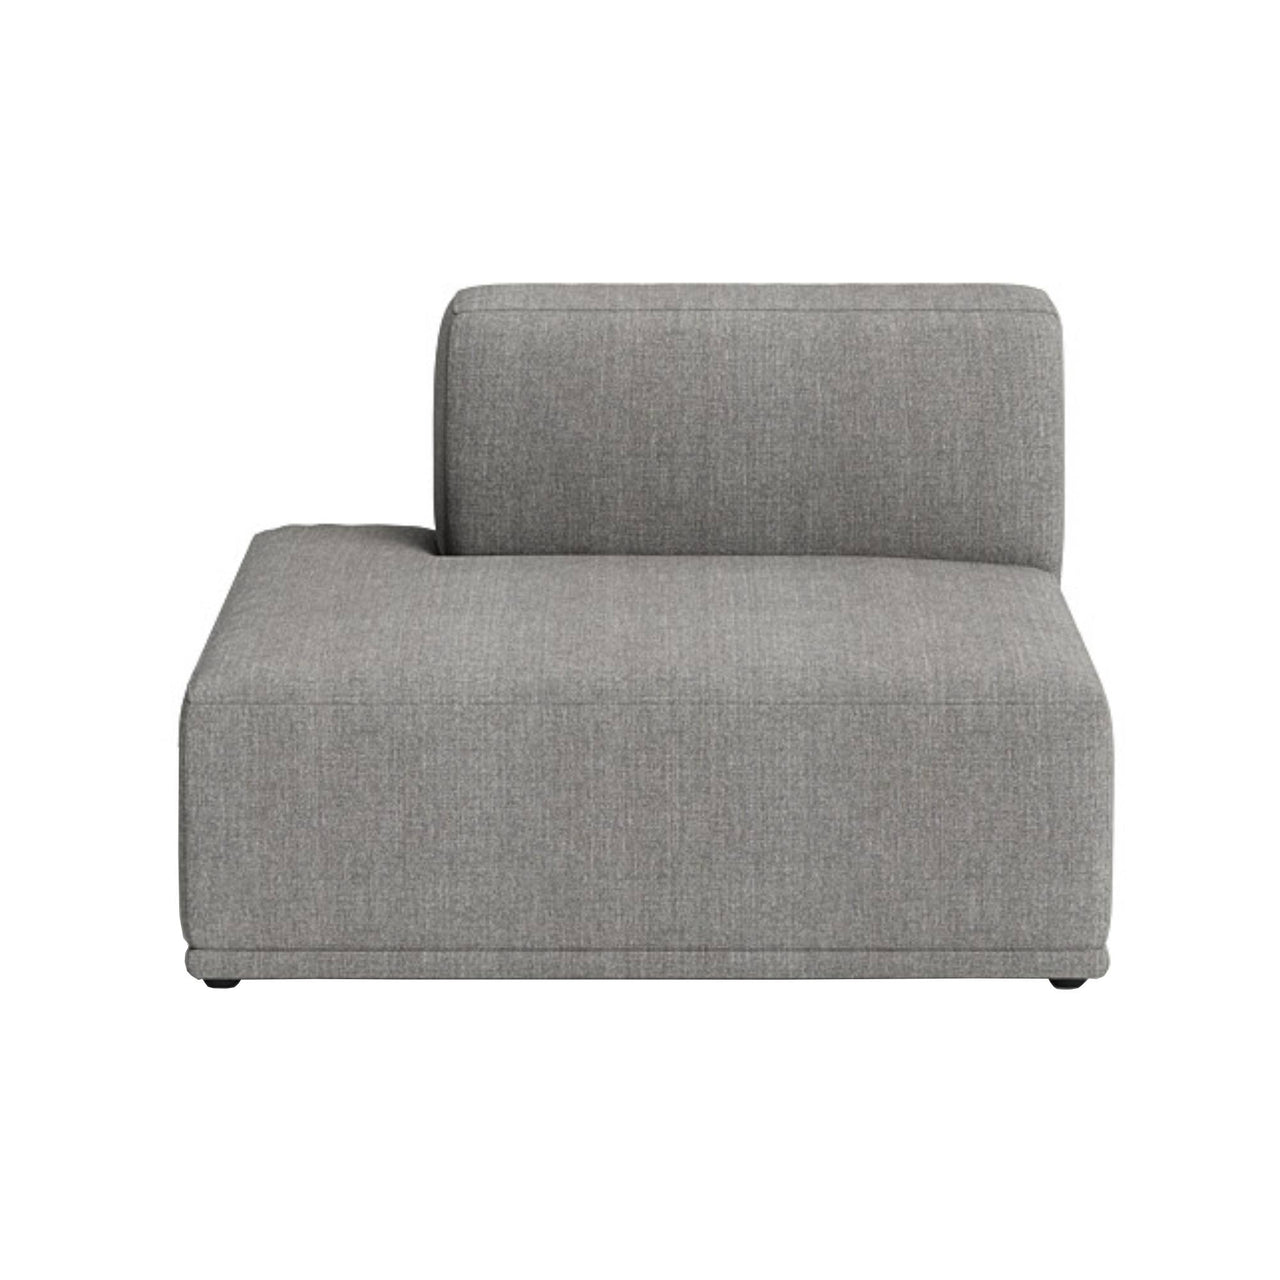 Connect Soft Sofa Modules: Left Open Ended